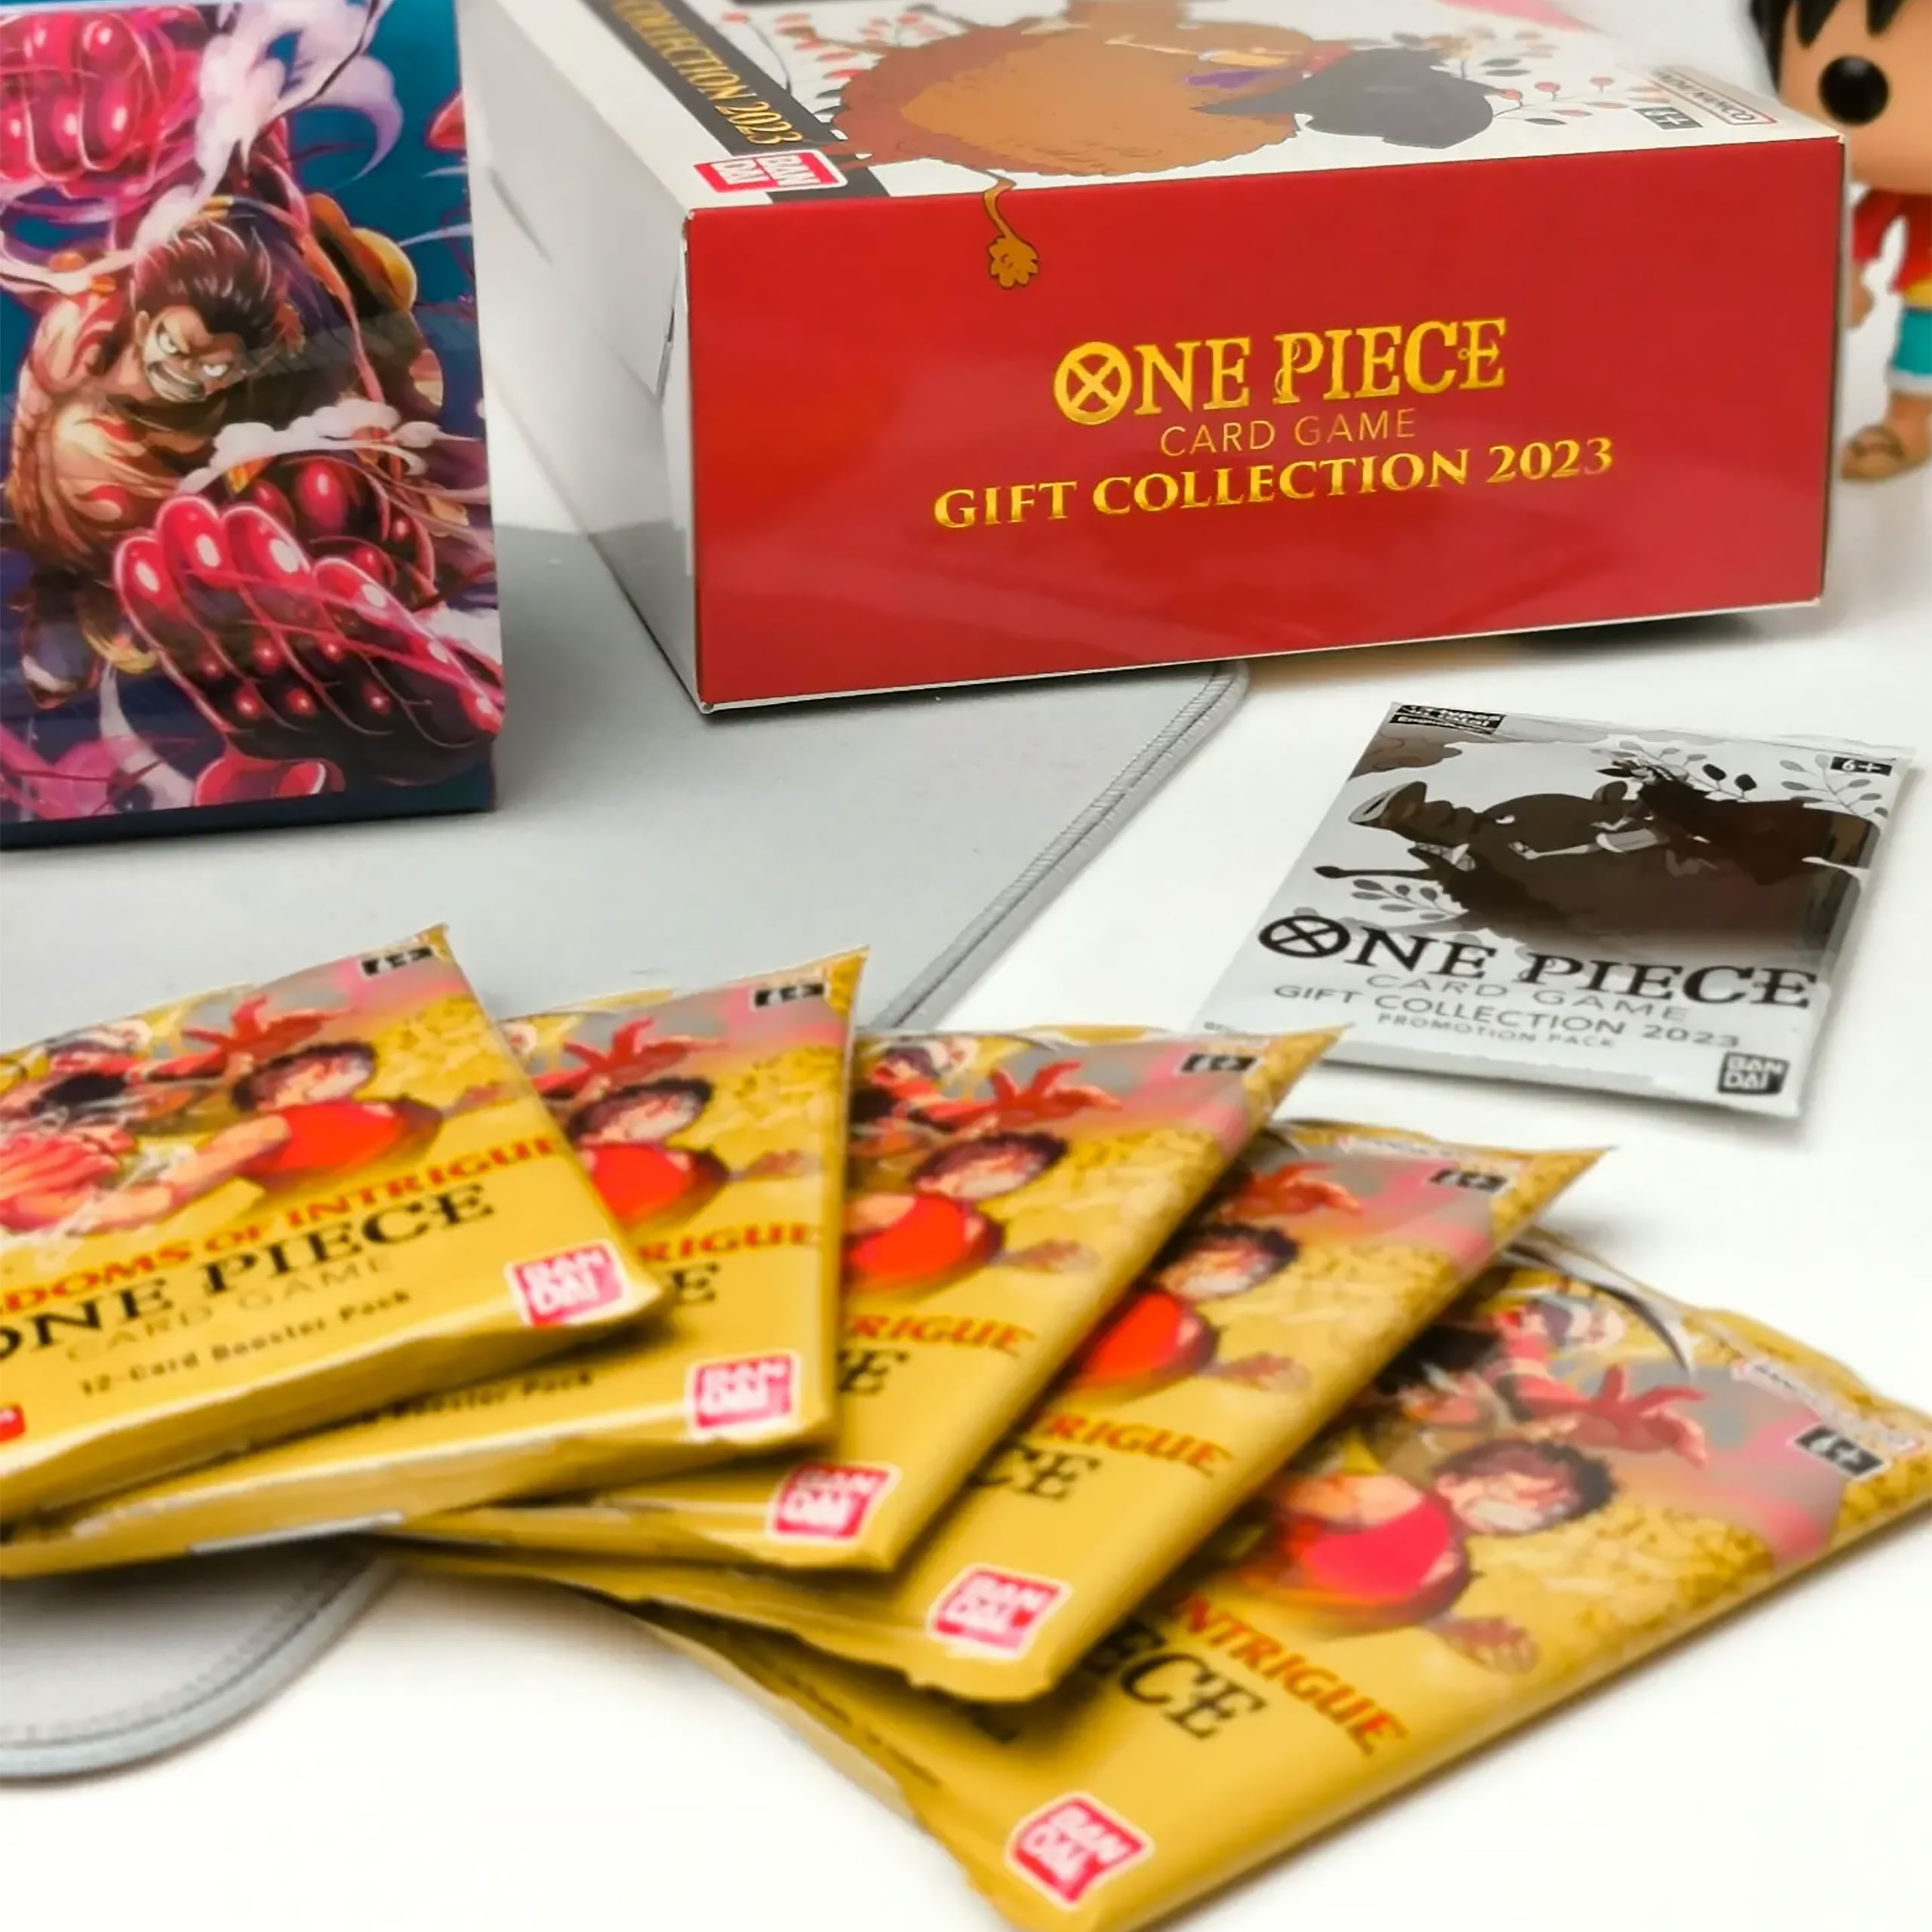 One Piece Card Game - Gift Collection 2023 English Version